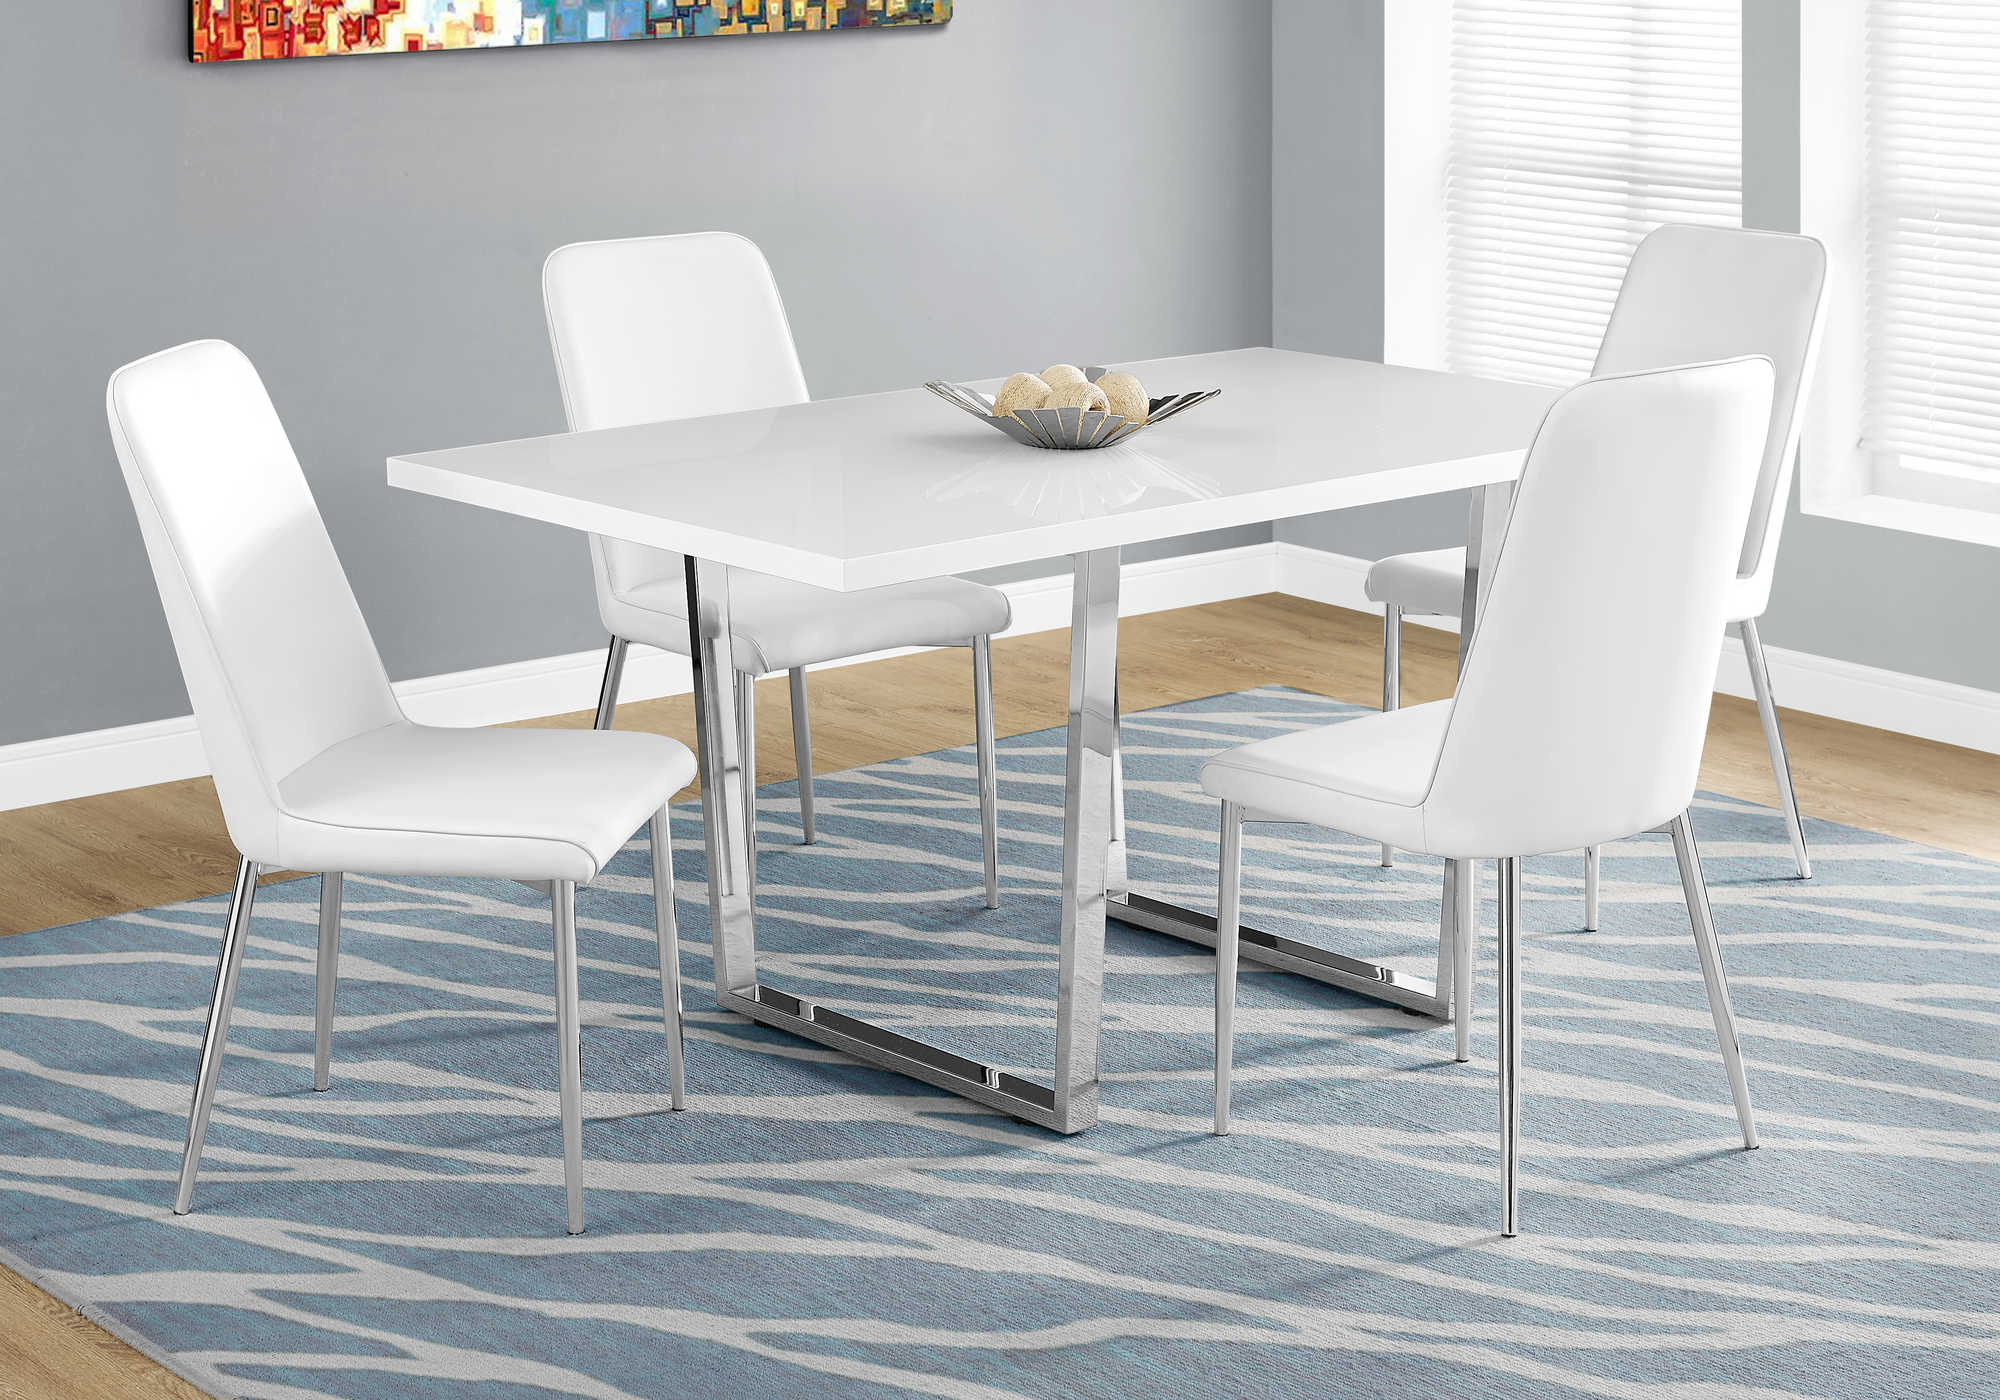 DINING TABLE - 36"X 60" / WHITE GLOSSY / CHROME METAL